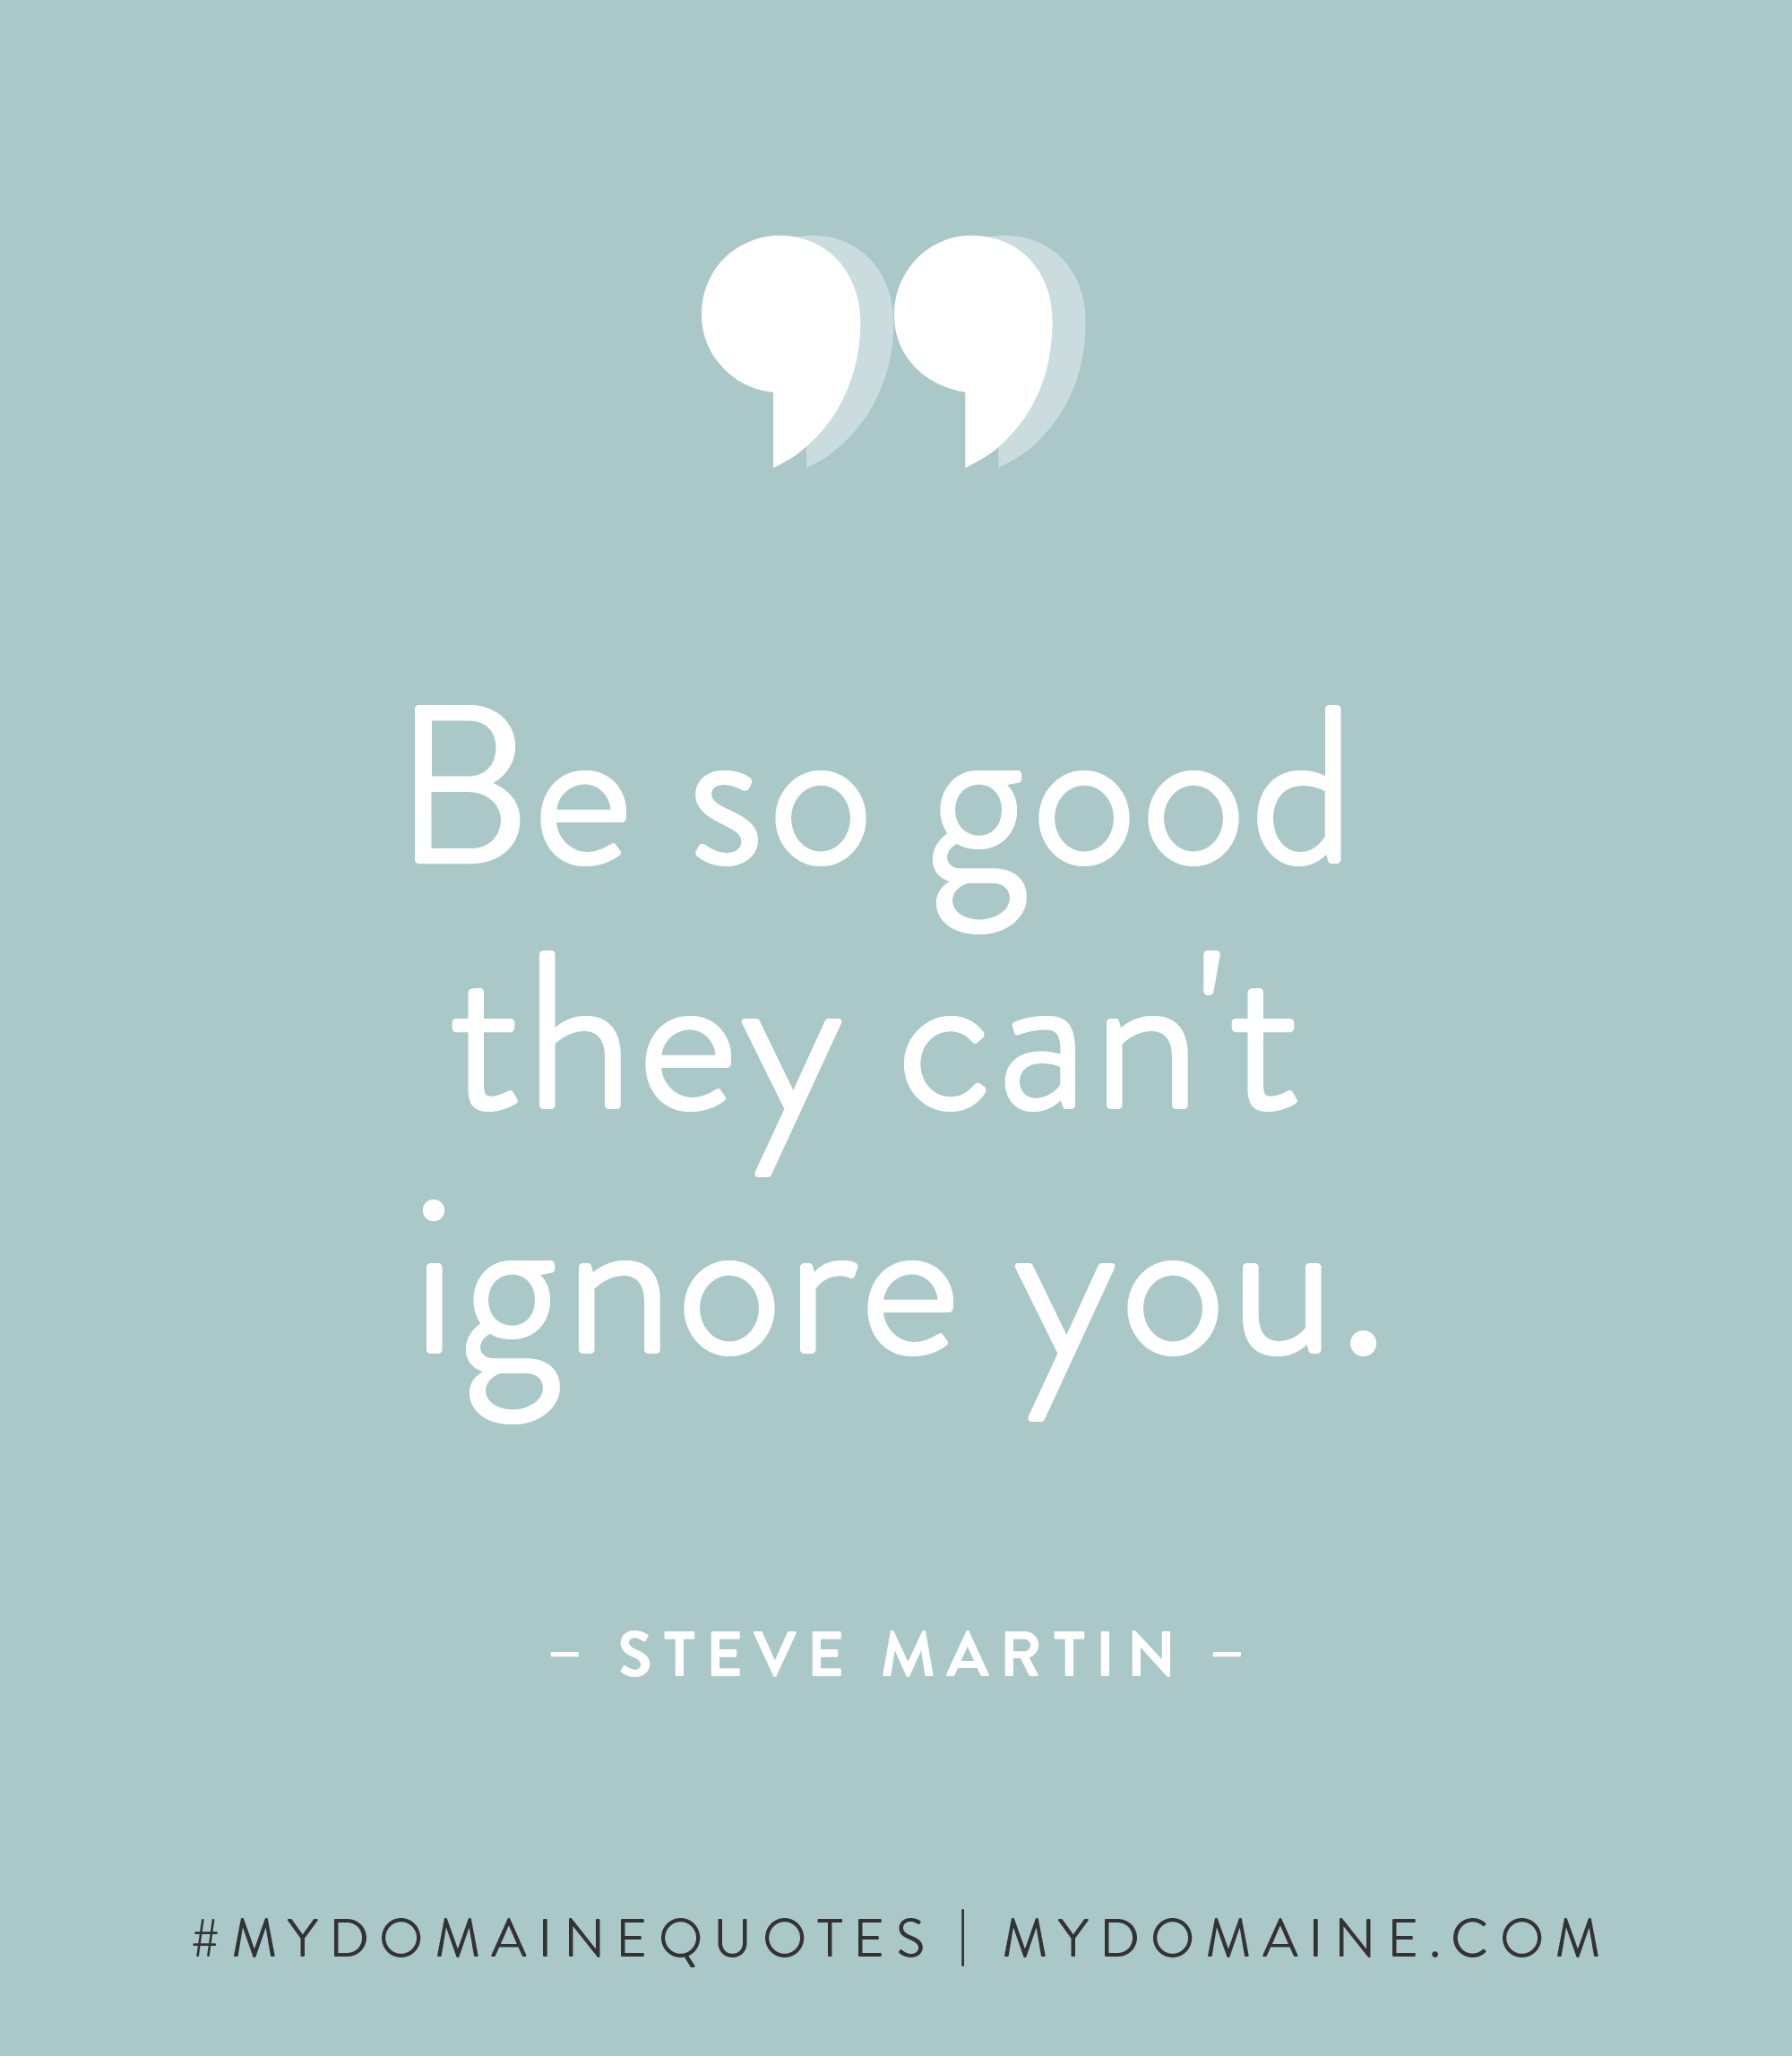 social-quote-steve-martin-03.png